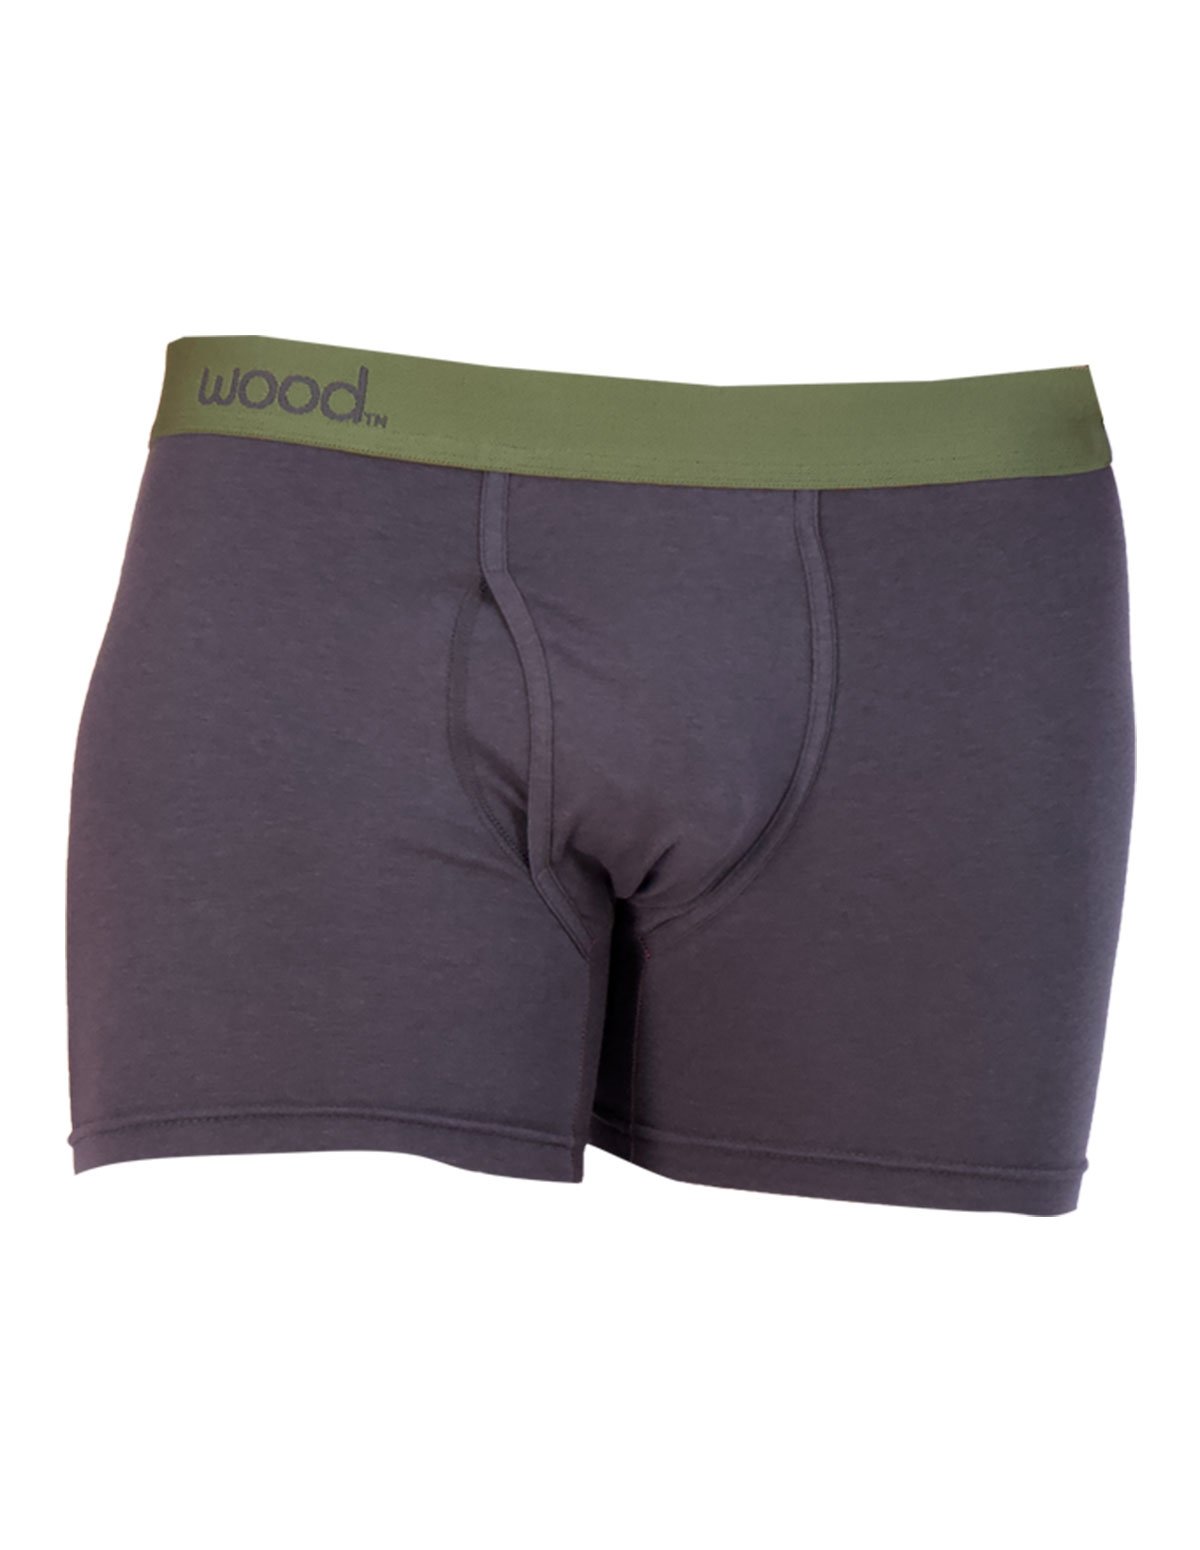 alternate image for Wood Boxer Brief W/ Fly - Iron